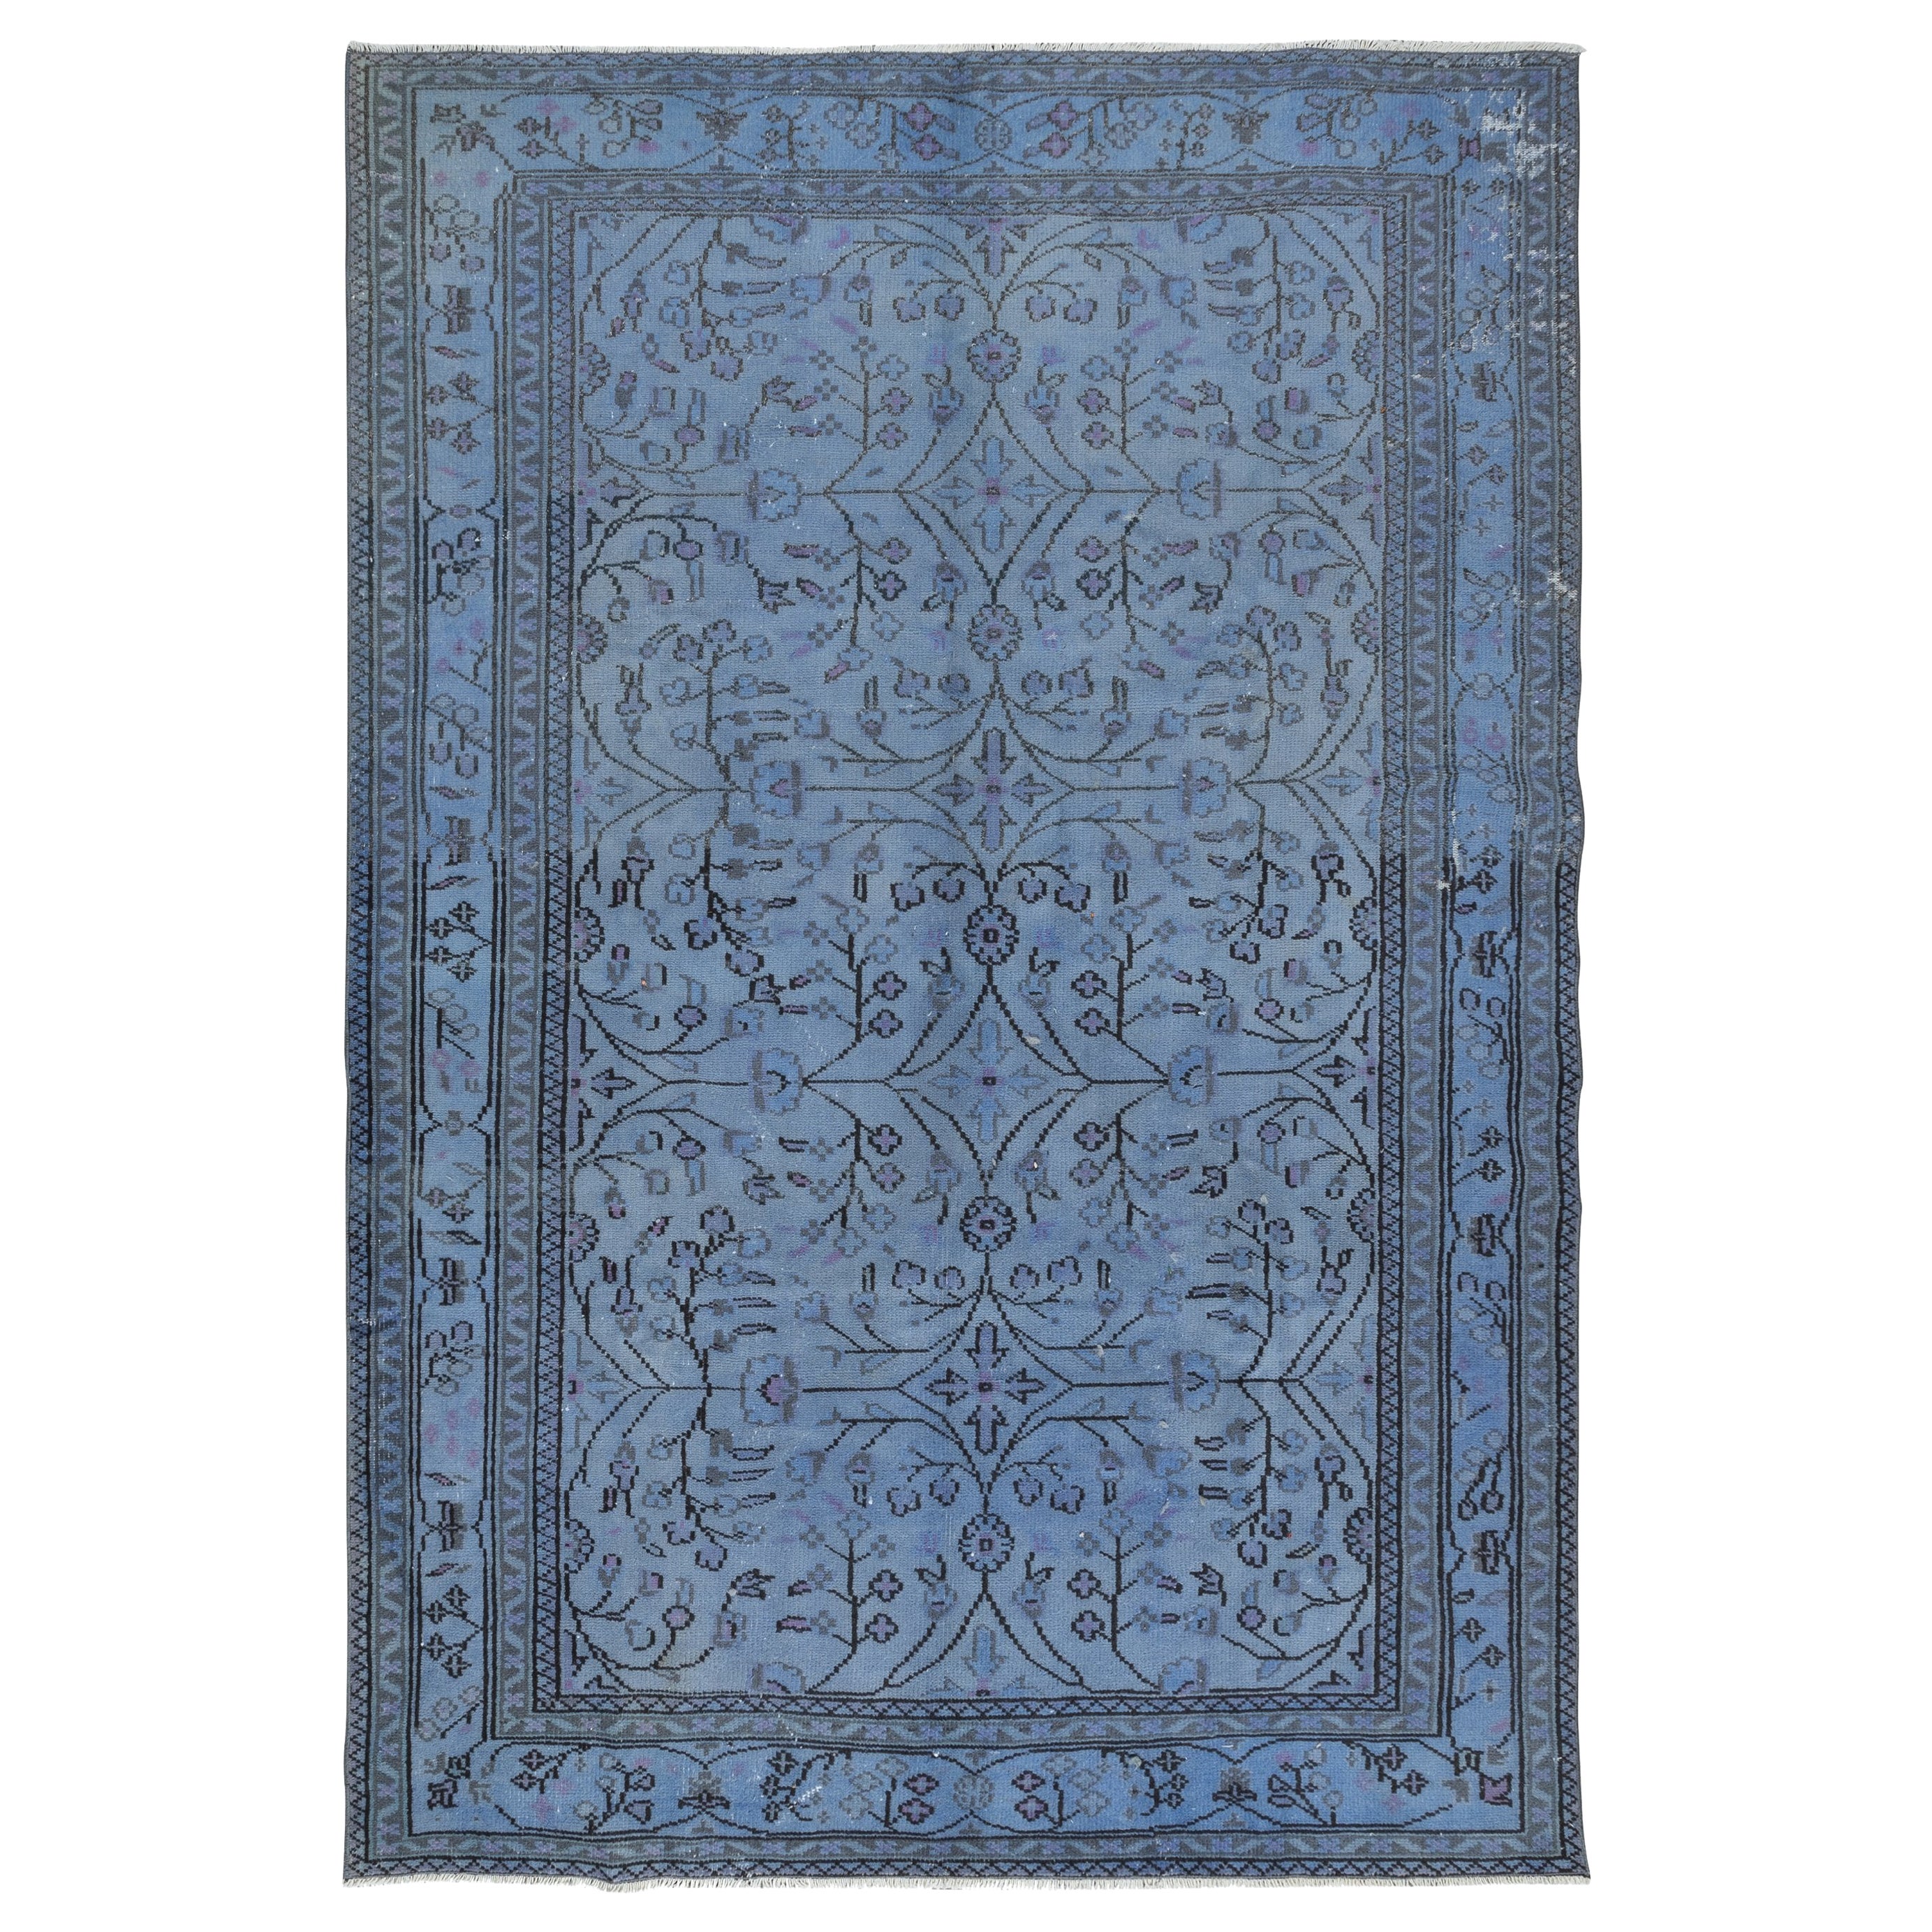 7x10 Ft Modern Handmade Rug Overdyed in Blue, One-of-a-kind Turkish Carpet For Sale